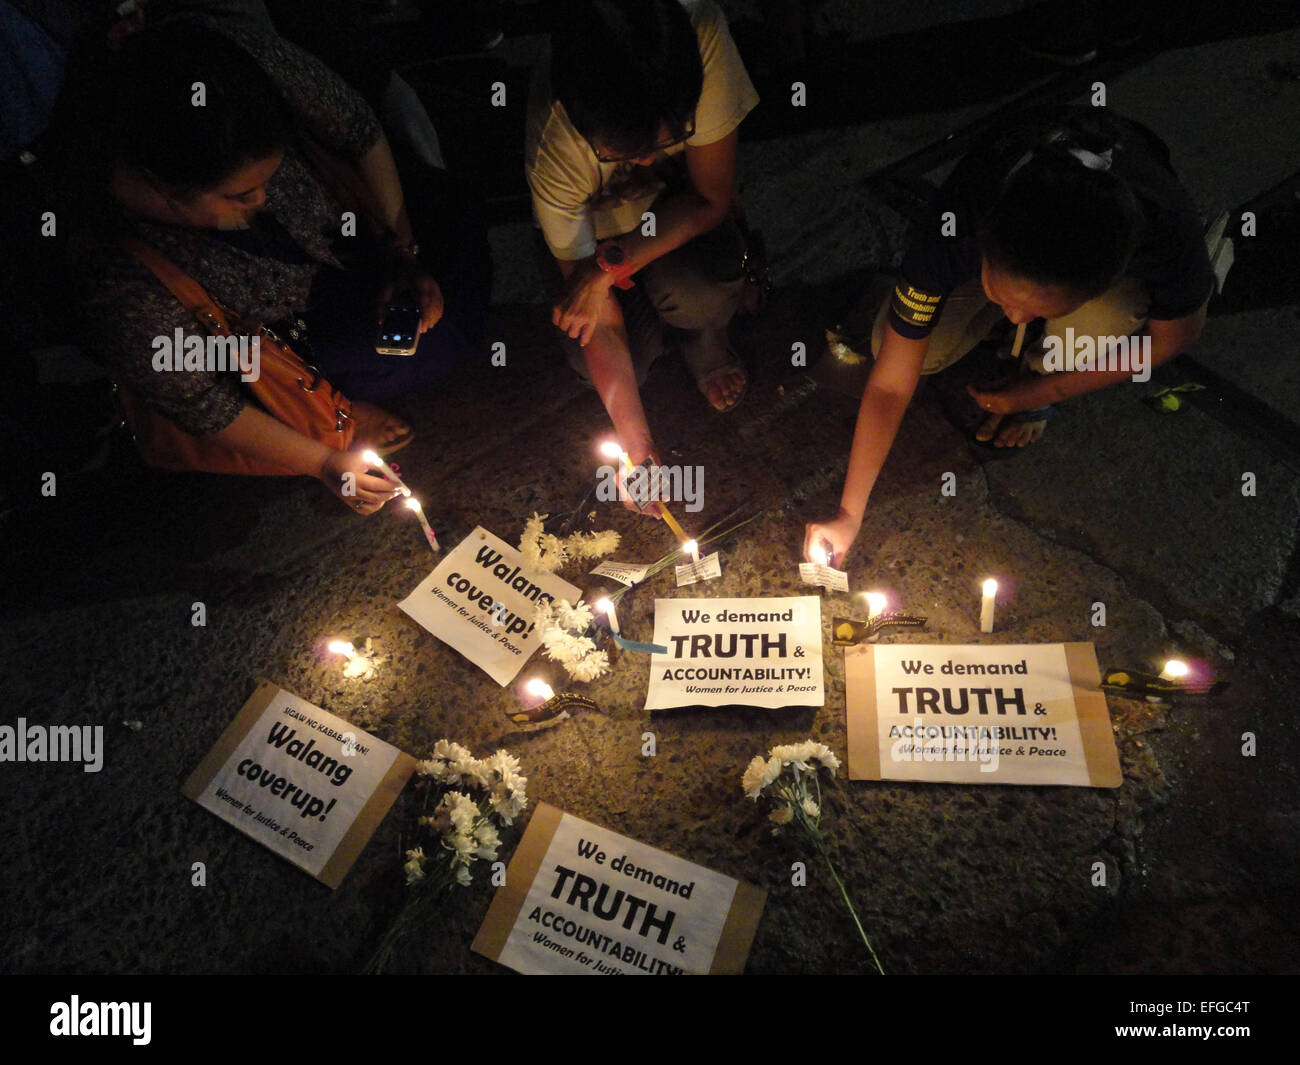 Quezon City, Philippines. 3rd Feb, 2015. Activists light candles alongside placards and flowers outside the Philippine National Police headquarters. A mass was celebrated outside the Philippine National Police headquarters as they called for truth and accountability for the casualties of the botched anti-terror operation in Mamasapano, Maguindanao provionce last January 25, including 44 police commandos, as well as several civilians. Credit:  Richard James Mendoza/Pacific Press/Alamy Live News Stock Photo